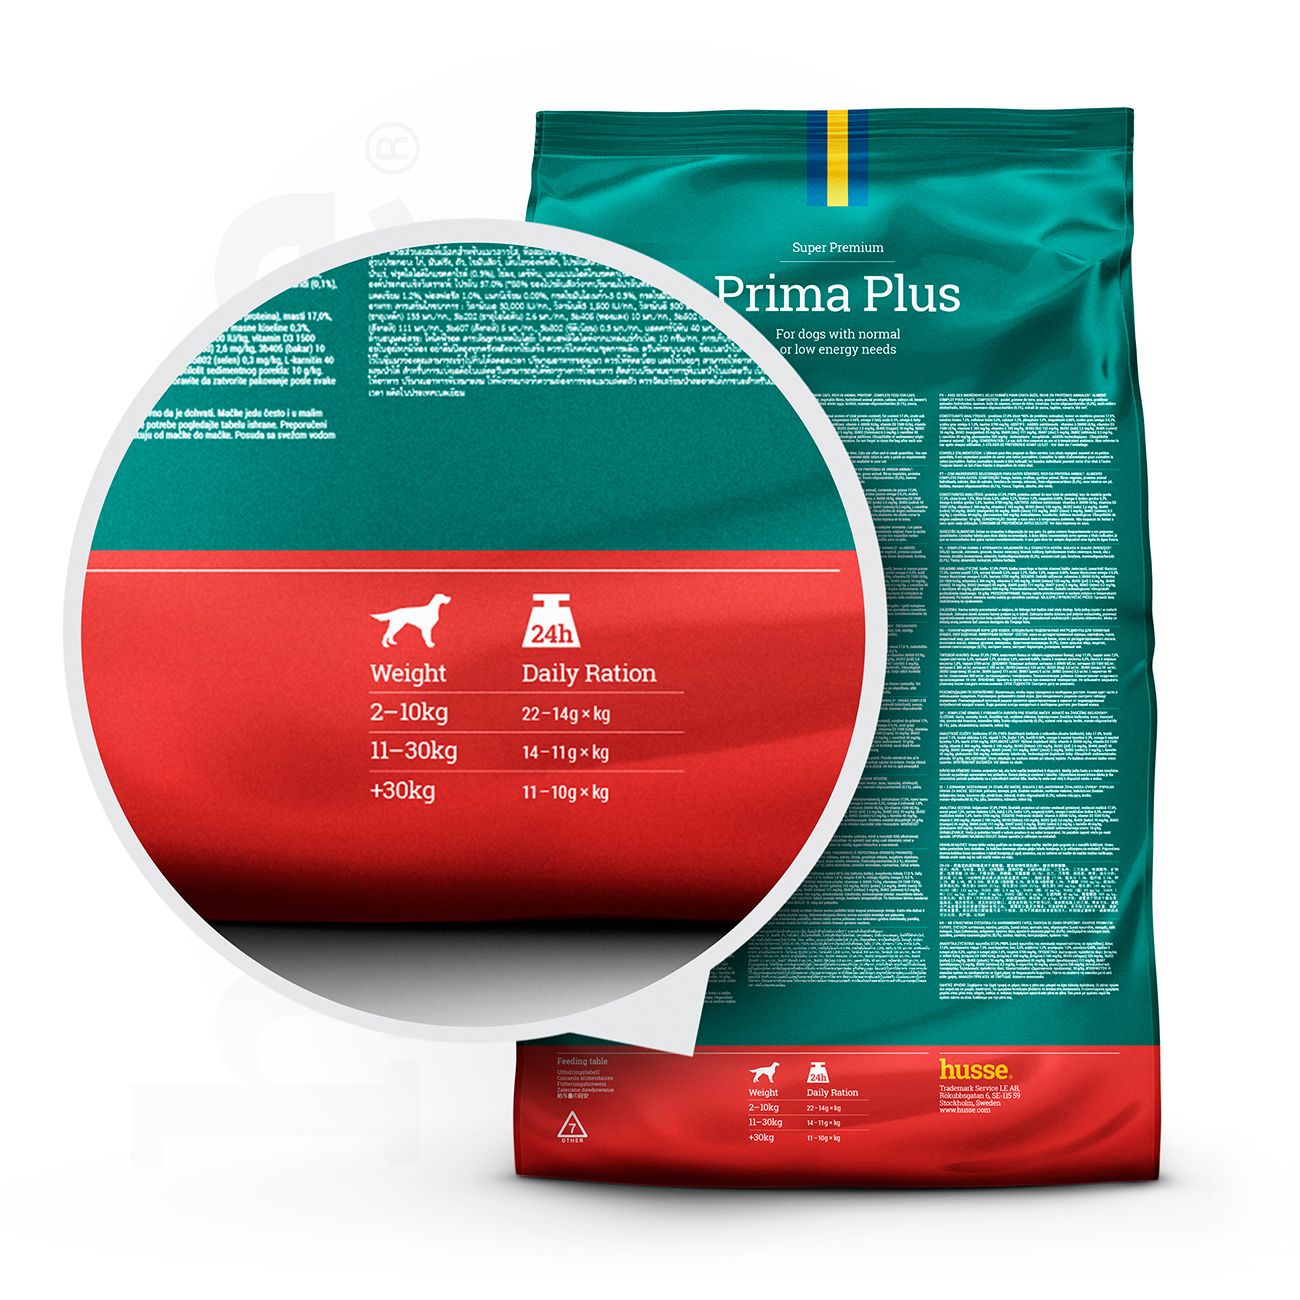 Prima Plus | Maintenance dog food with moderate fat & calorie content